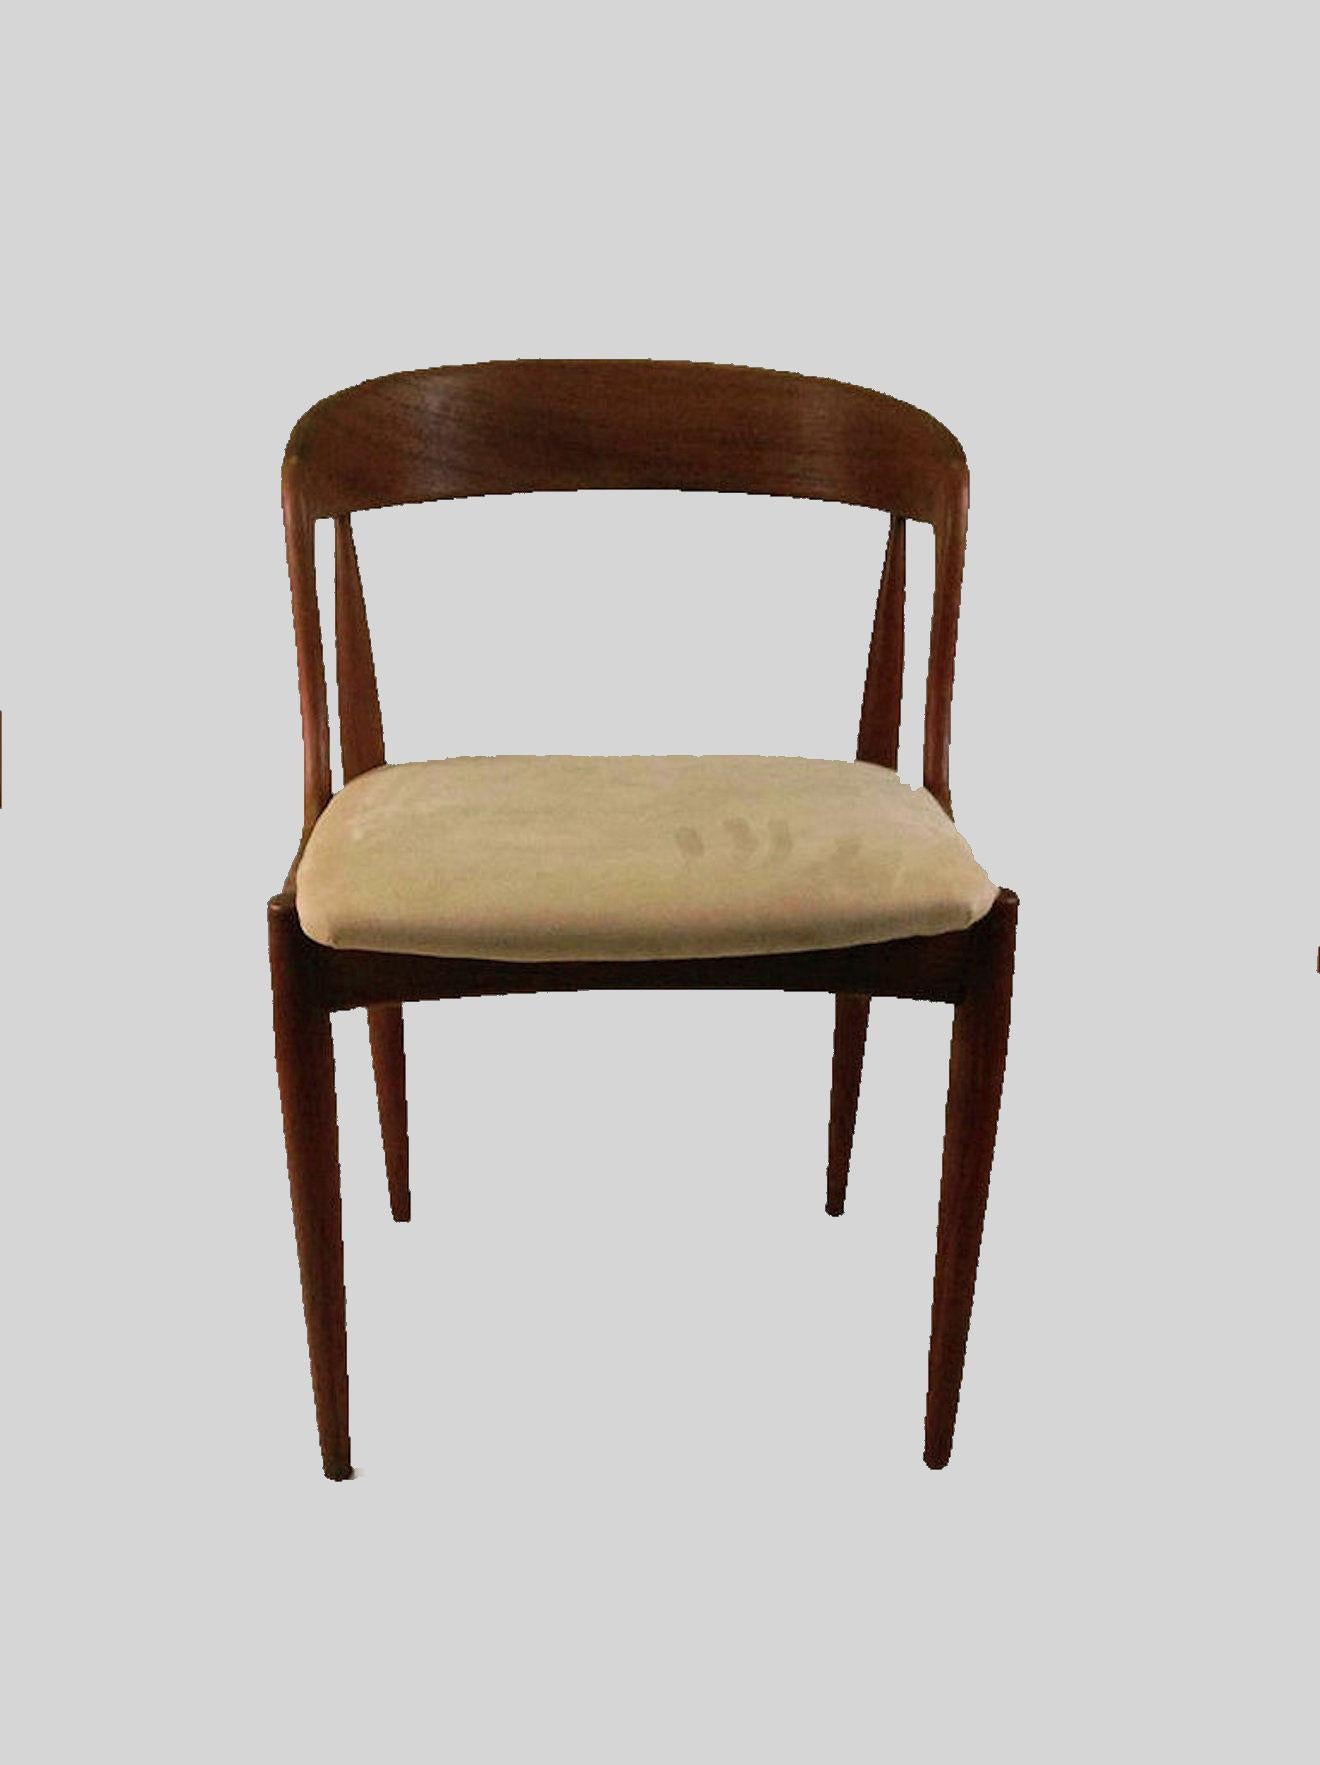 Set of eight fully restored organic shaped dining chairs in teak designed by the Danish designer Johannes Andersen for Uldum Møbelfabrik in 1965.

The comfortable chairs features a solid carefully shaped teak frame with lots of organic shapes that